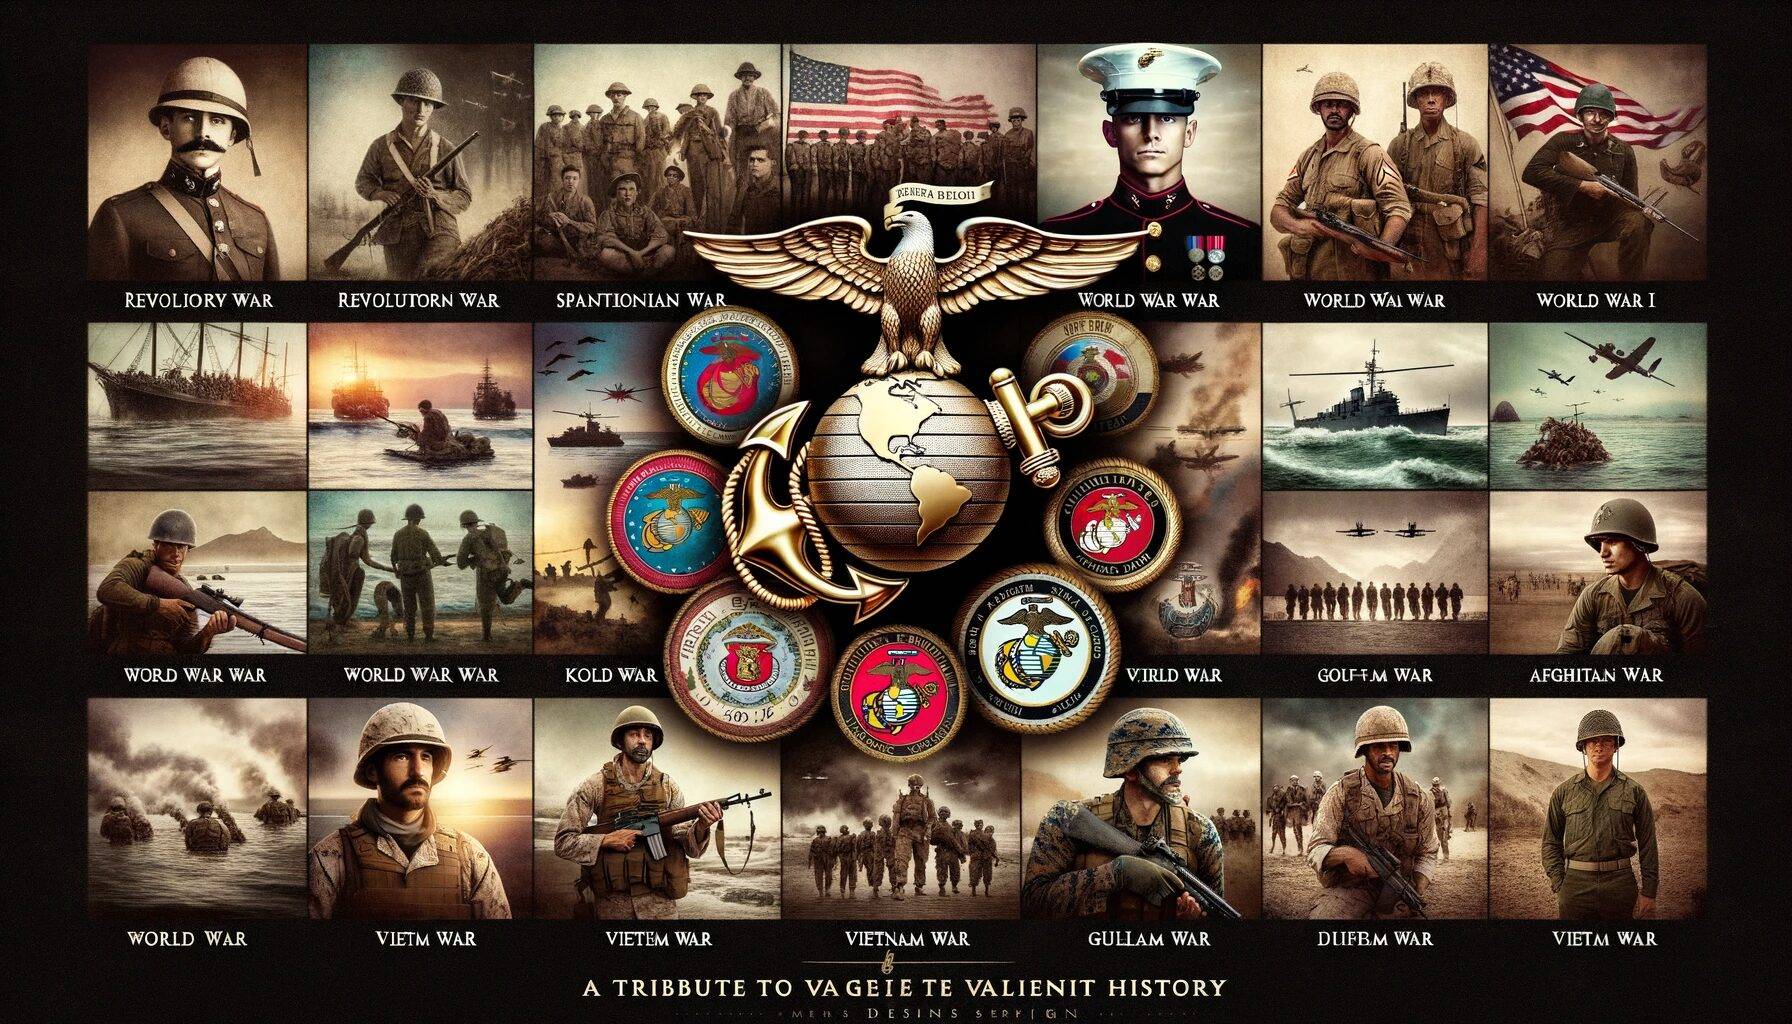 Photo montage showcasing the evolution of Marines through various wars. On the far left, Marines from the Revolutionary War, transitioning into the Sp